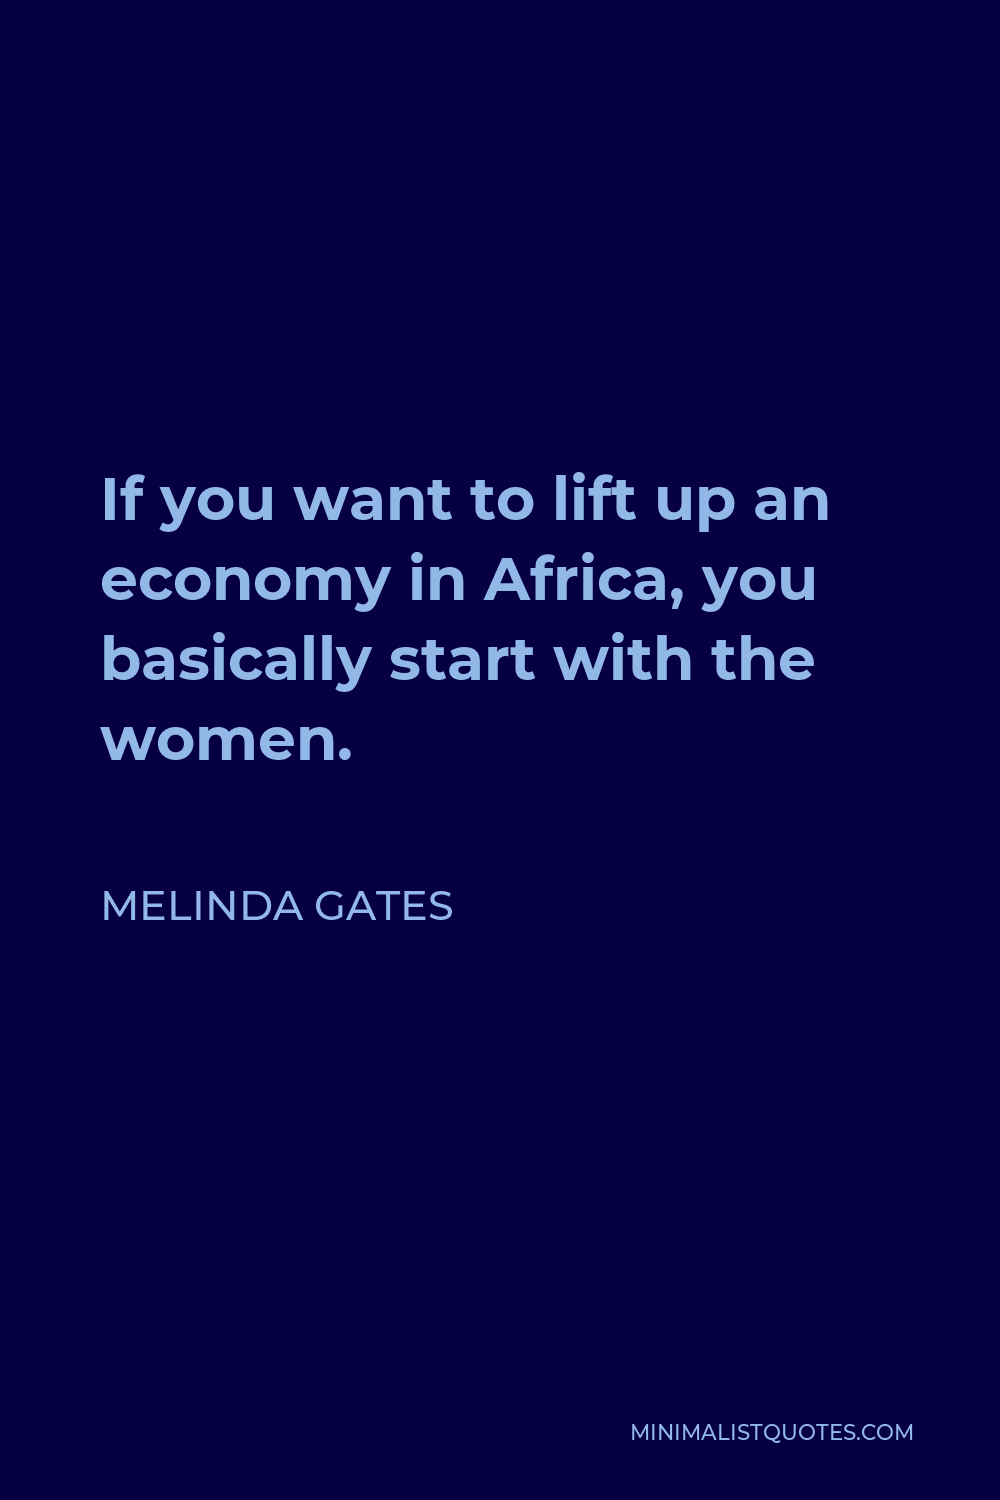 Melinda Gates Quote - If you want to lift up an economy in Africa, you basically start with the women.